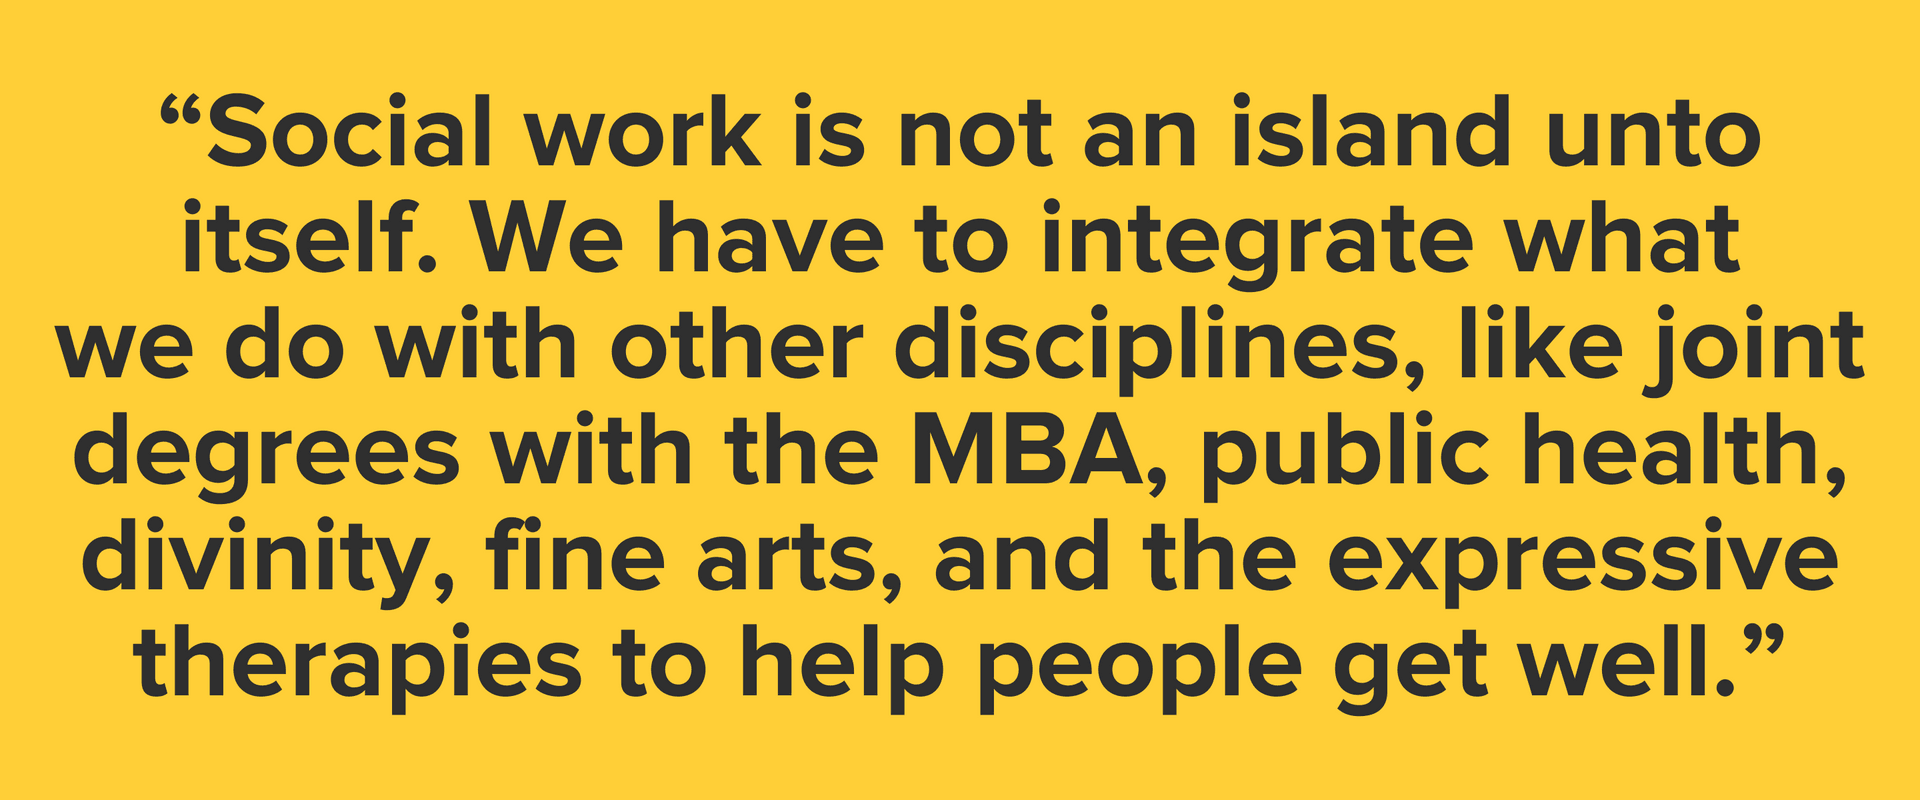 “Social work is not an island unto itself. We have to integrate what we do with other disciplines, like joint degrees with the MBA, public health, divinity, fine arts, and the expressive therapies to help people get well.”